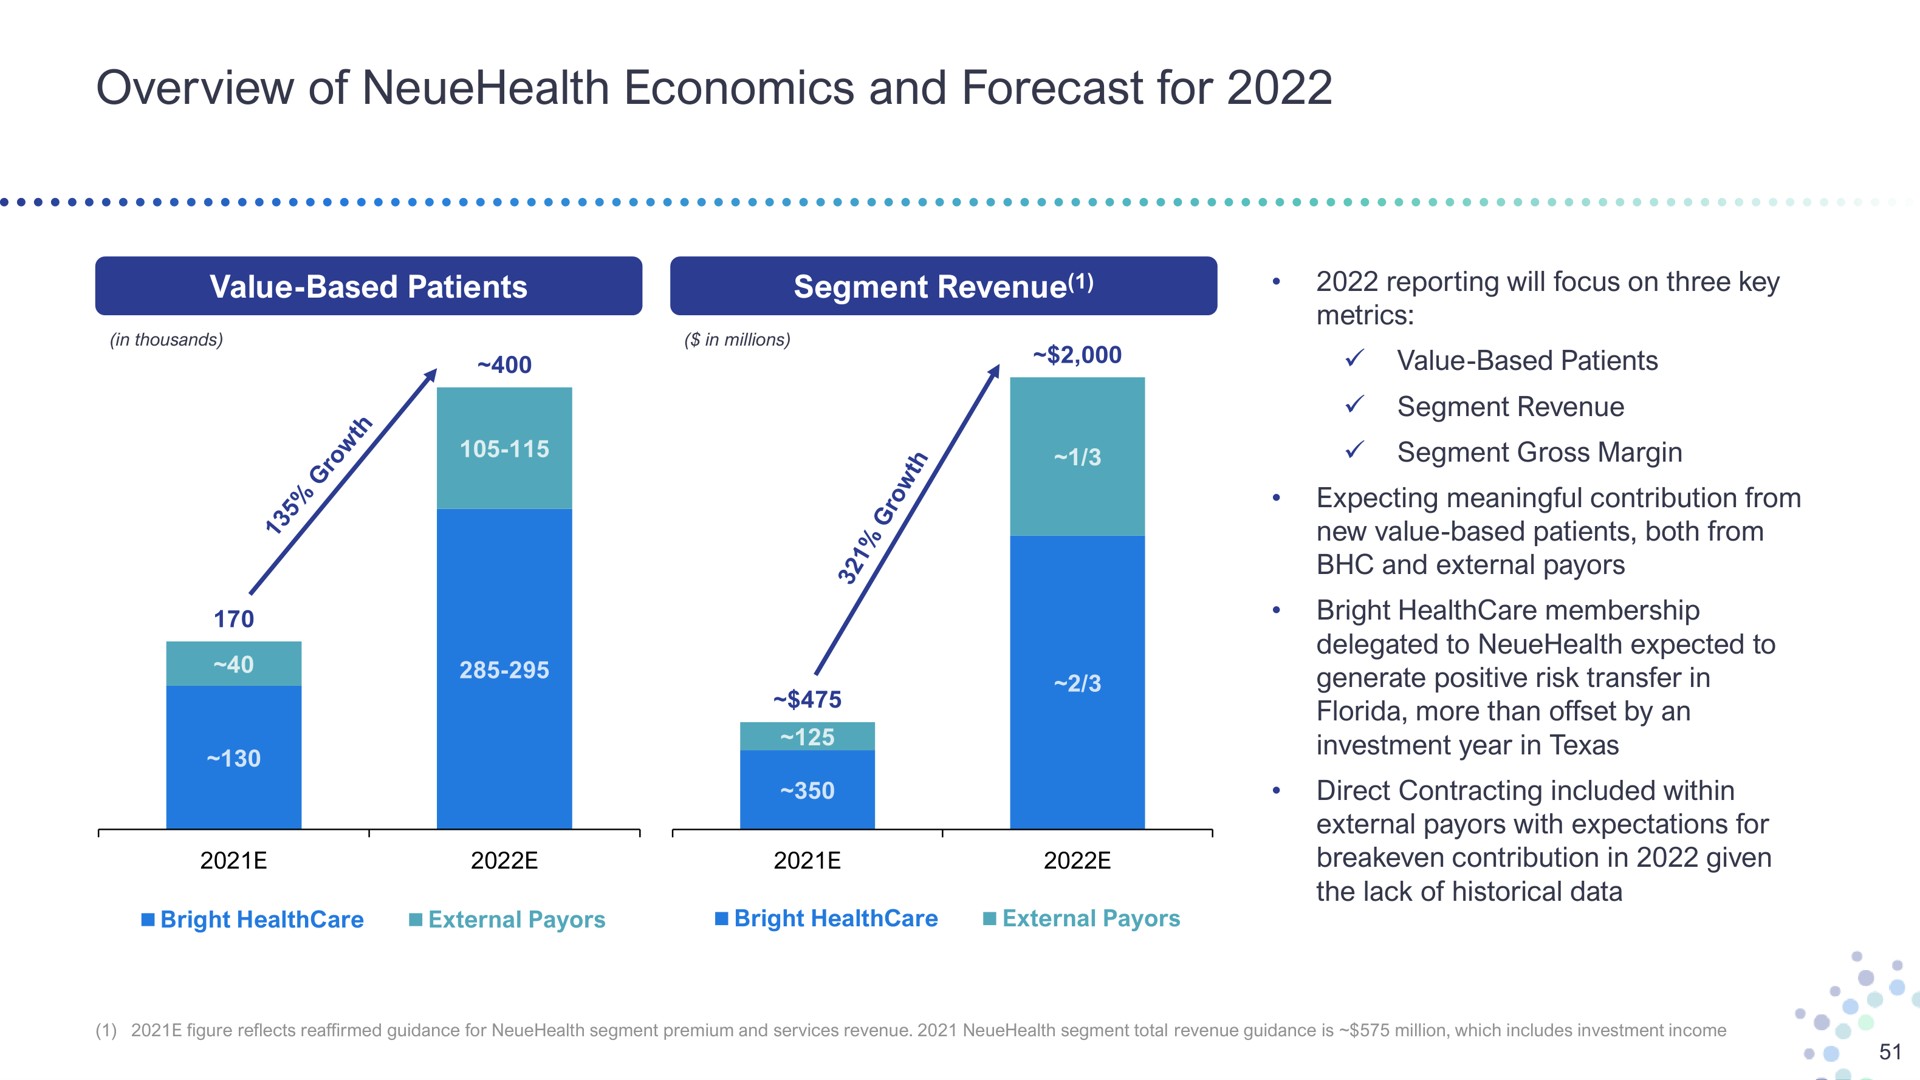 overview of economics and forecast for value based patients lin mace reporting will focus on three key metrics value based patients segment revenue segment gross margin expecting meaningful contribution from new value based patients both from external bright membership delegated to expected to generate positive risk transfer in investment year in direct contracting included within external with expectations contribution in given the lack historical data | Bright Health Group